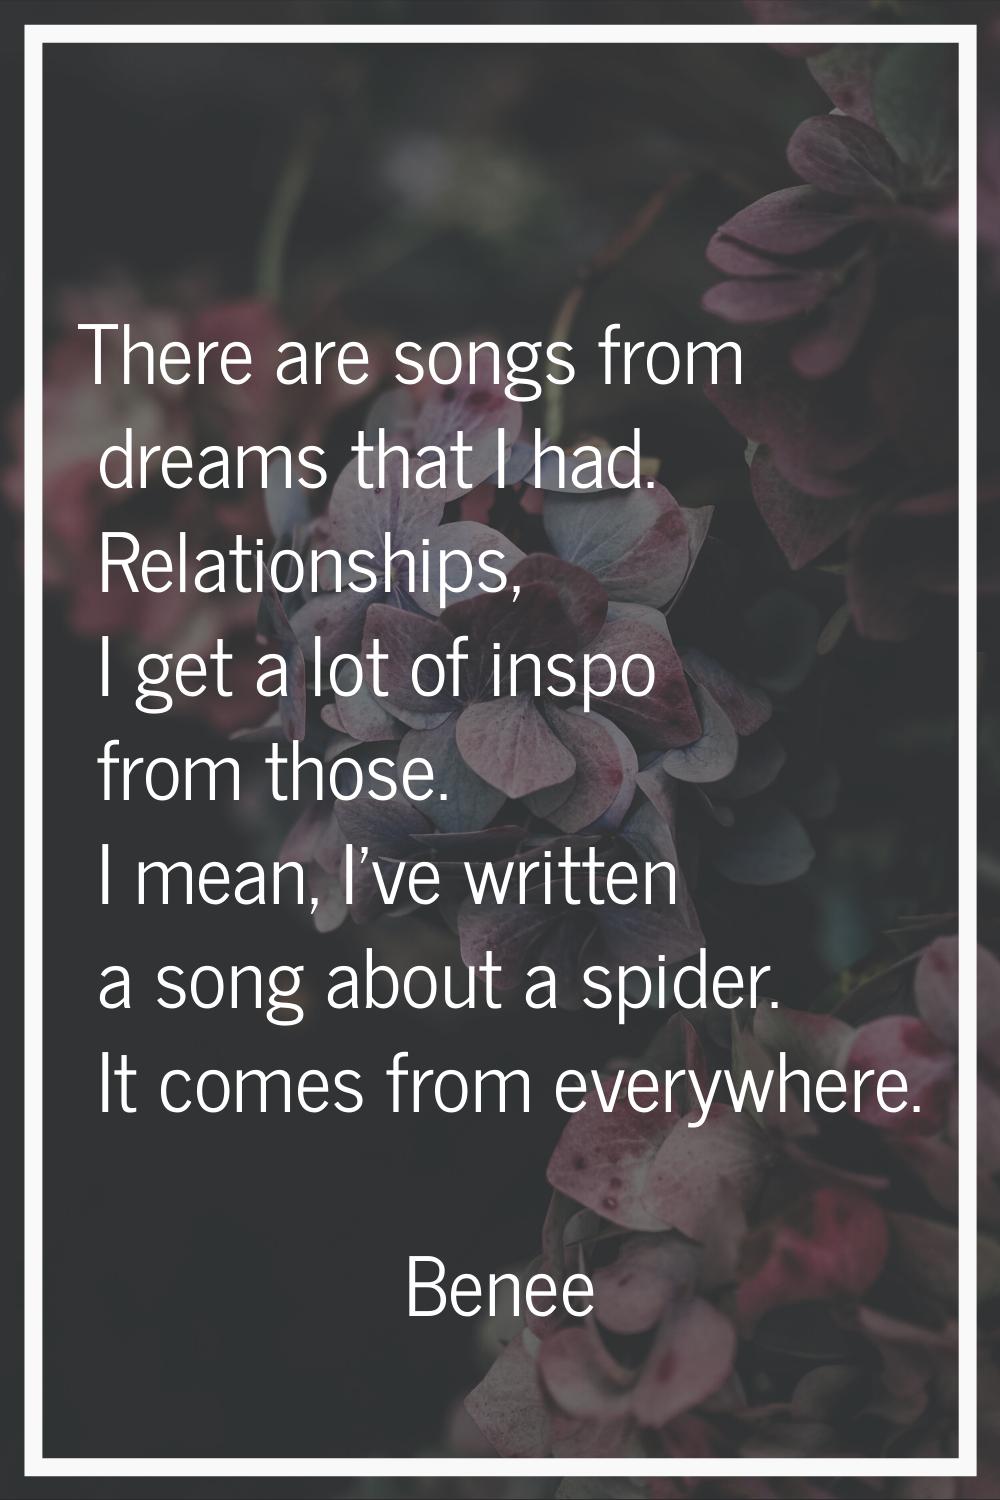 There are songs from dreams that I had. Relationships, I get a lot of inspo from those. I mean, I'v